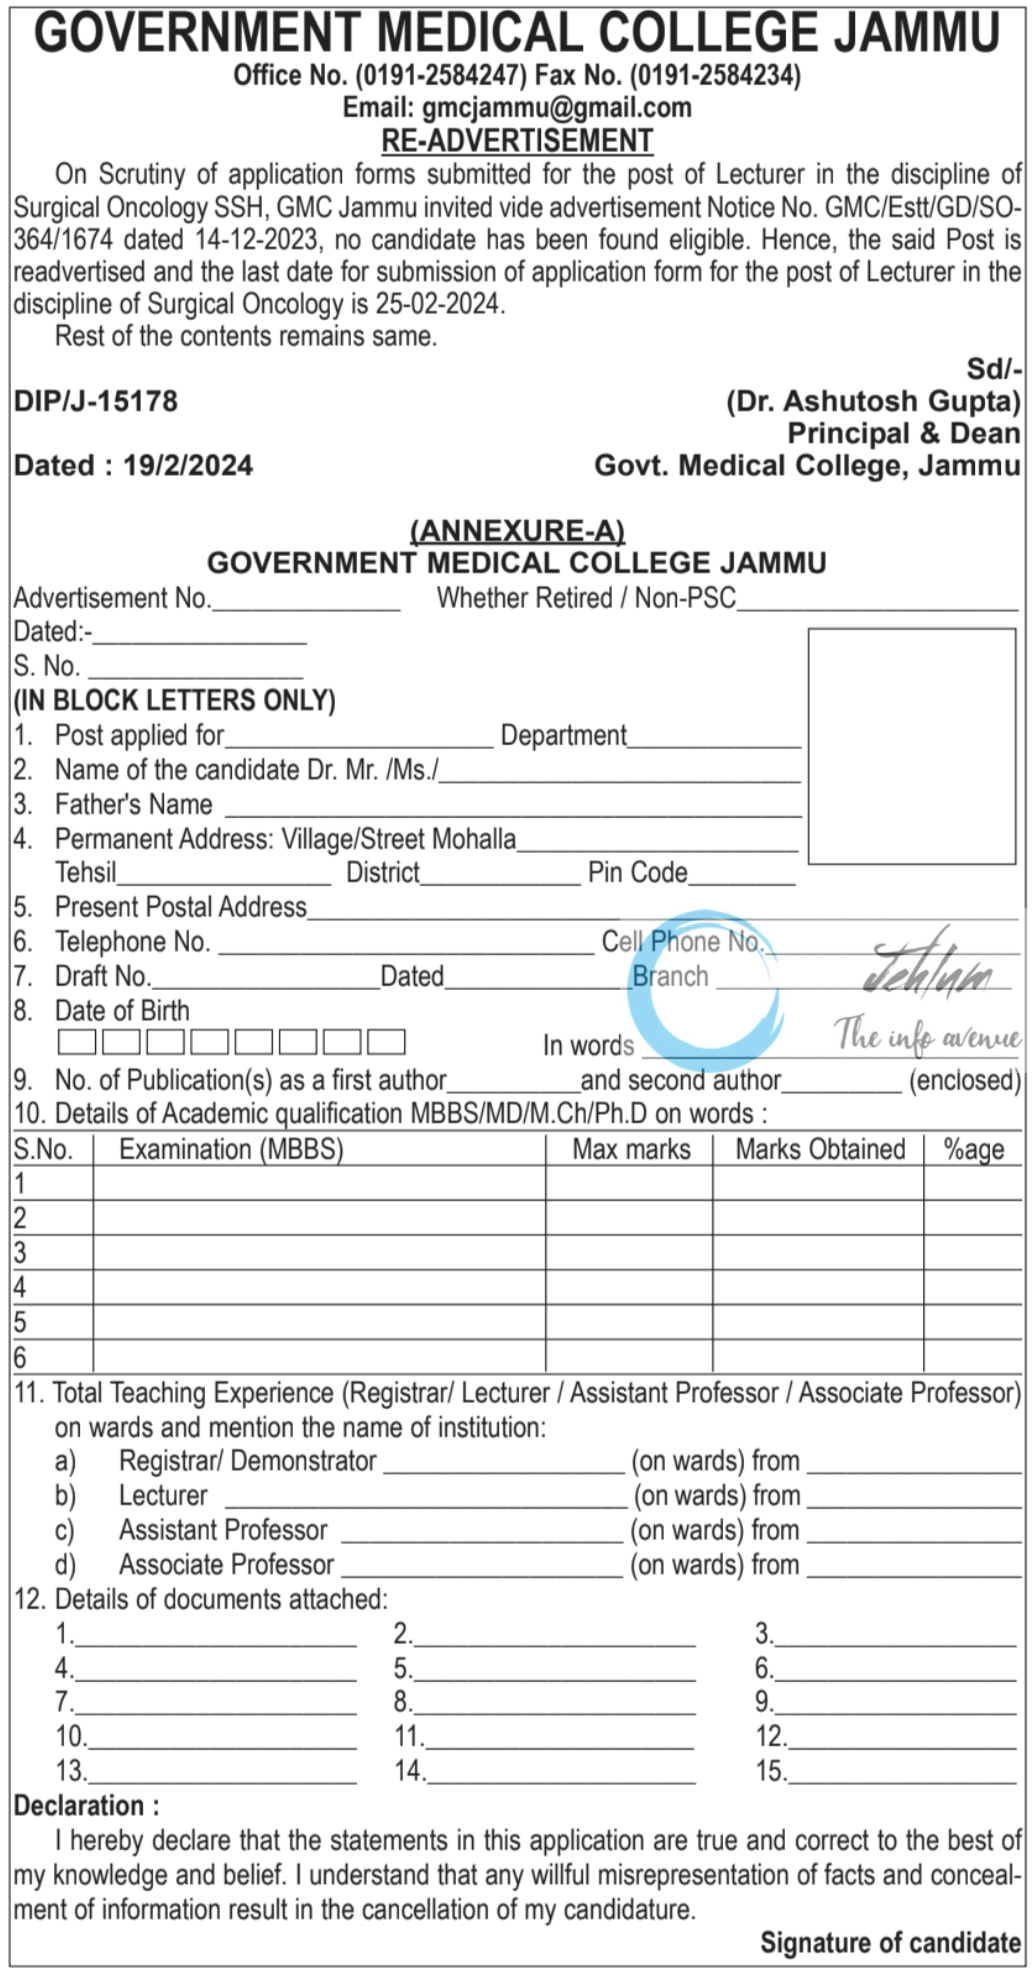 GMC JAMMU SURGICAL ONCOLOGY LECTURER RE-ADVERTISEMENT 2024